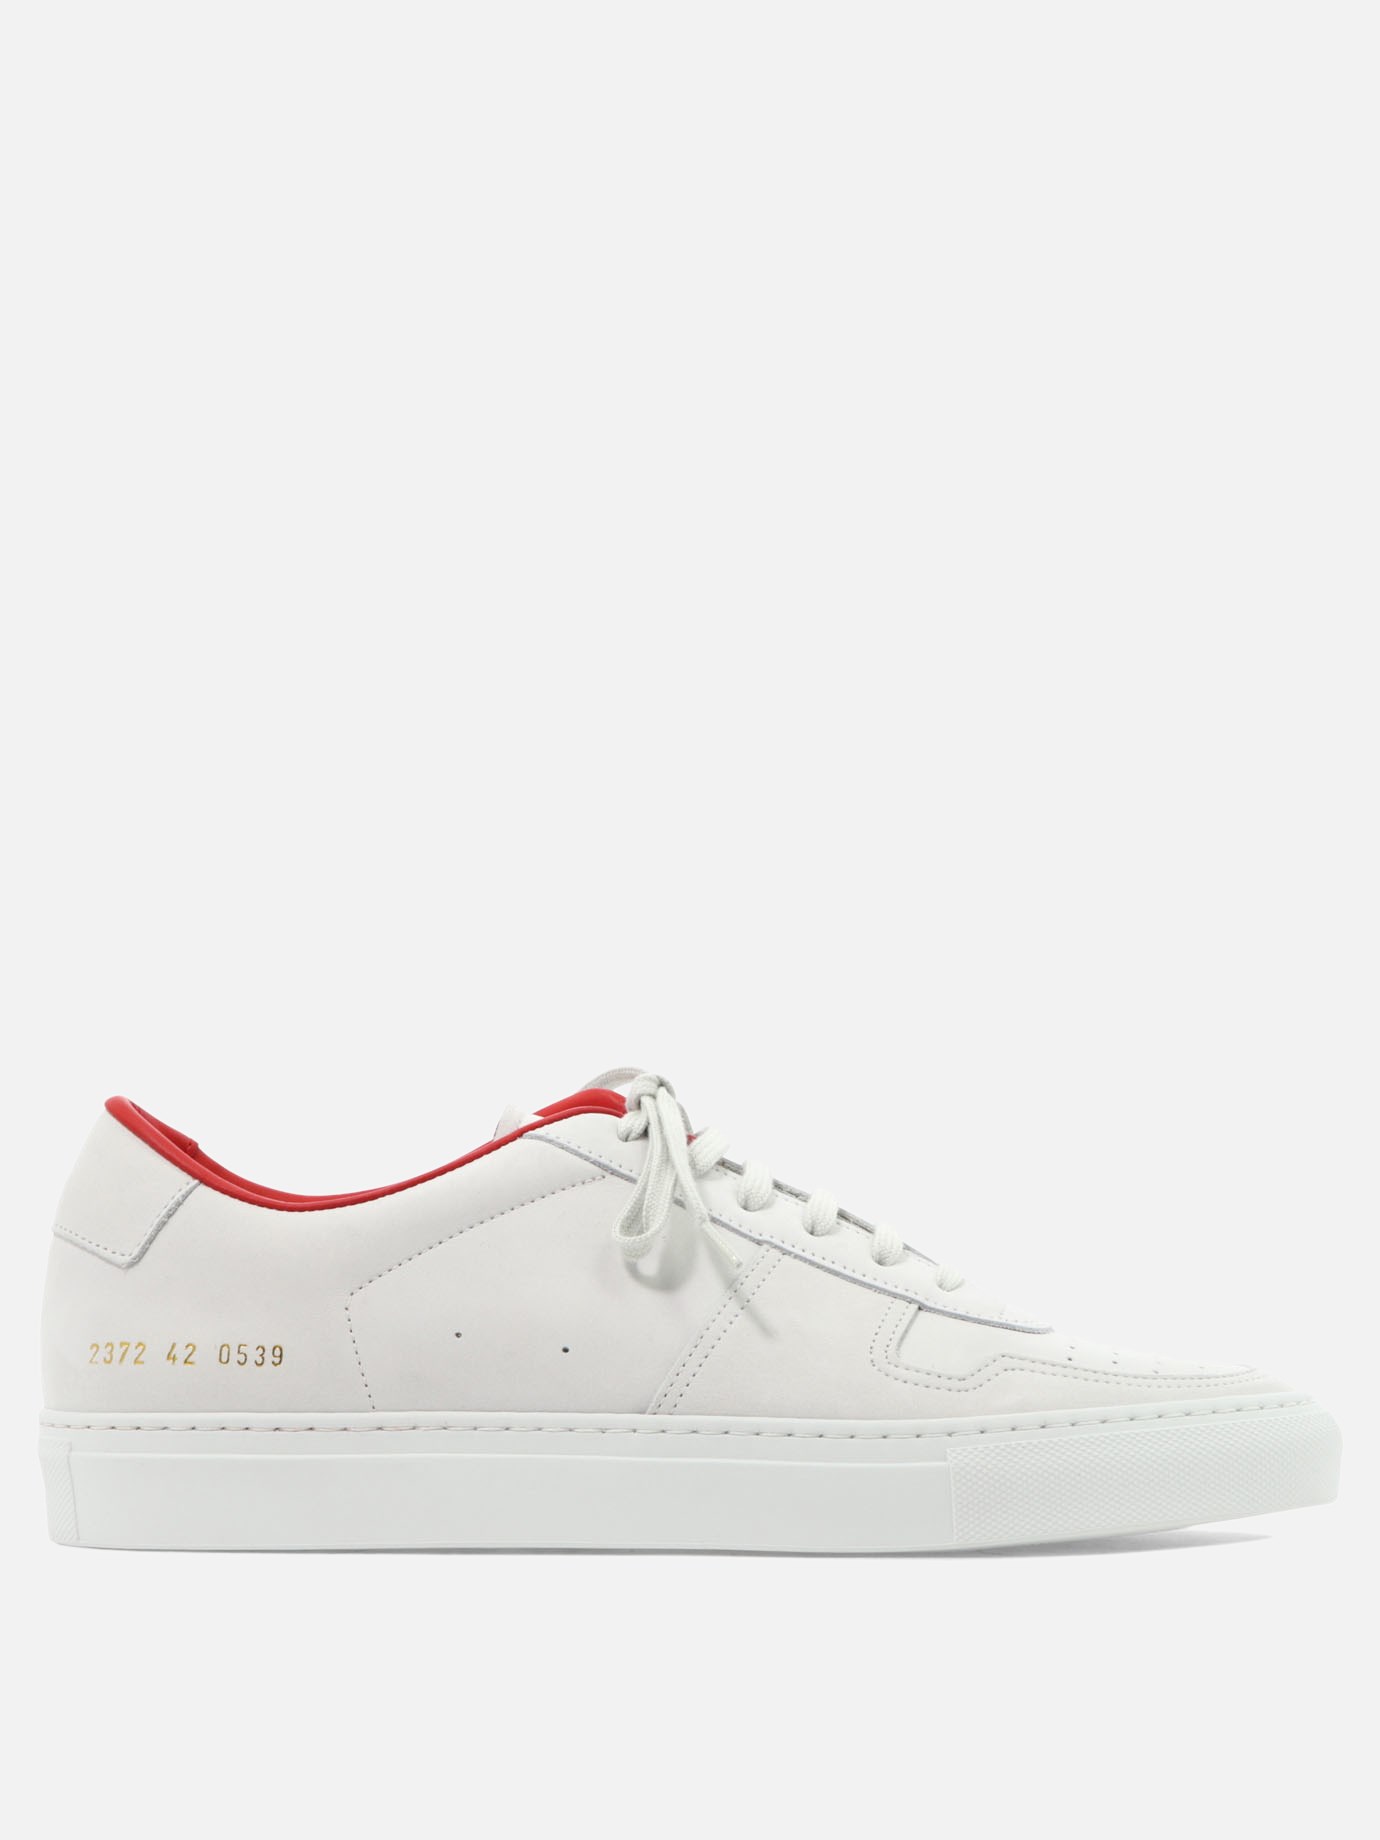 Sneaker  Bball Summer by Common Projects - 3